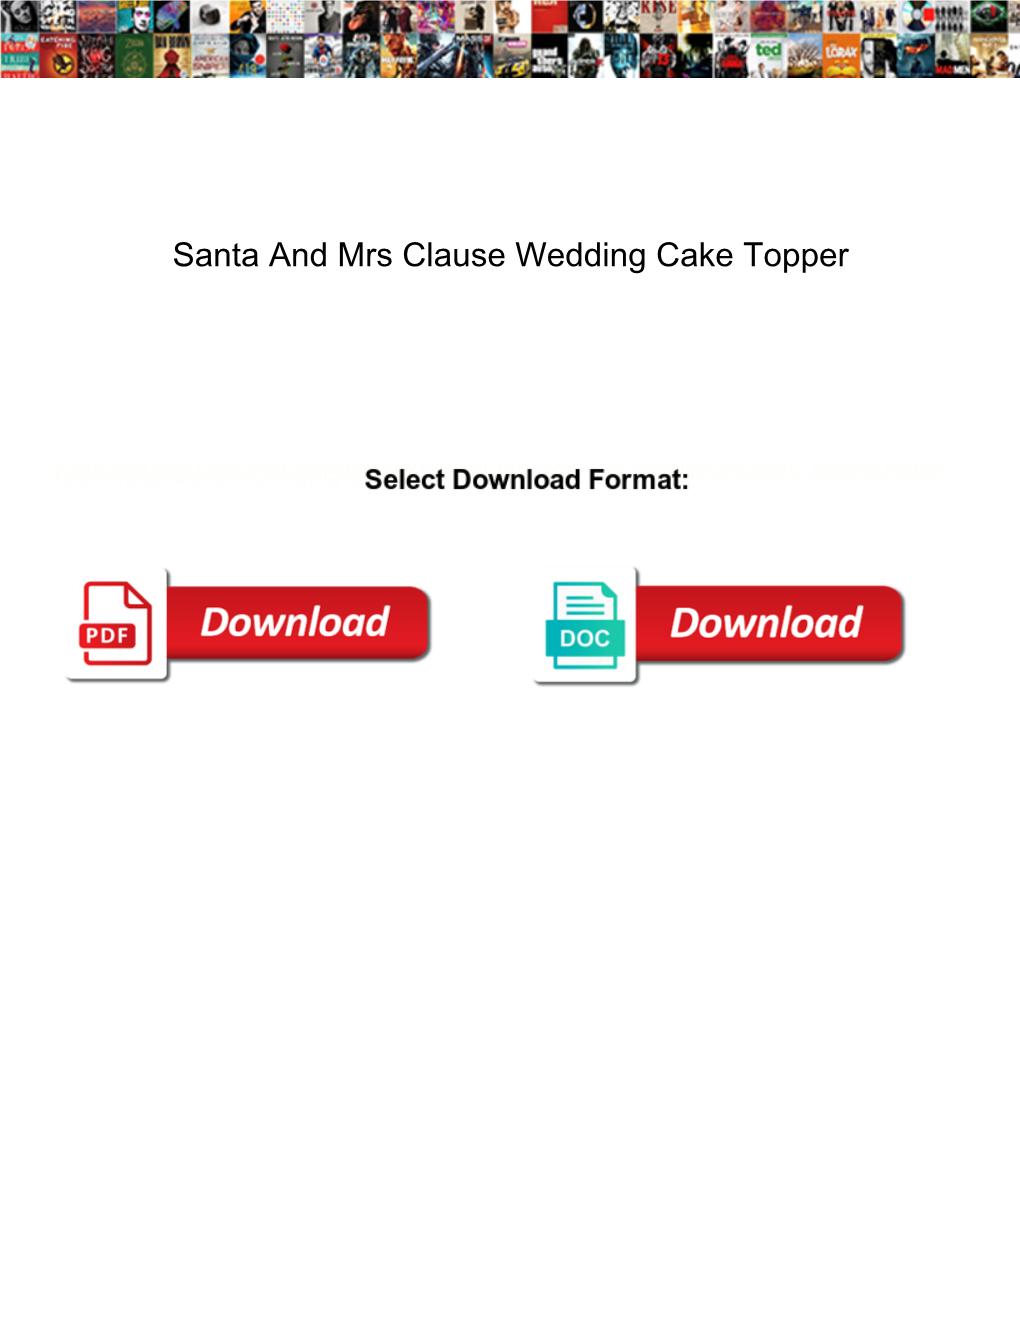 Santa and Mrs Clause Wedding Cake Topper